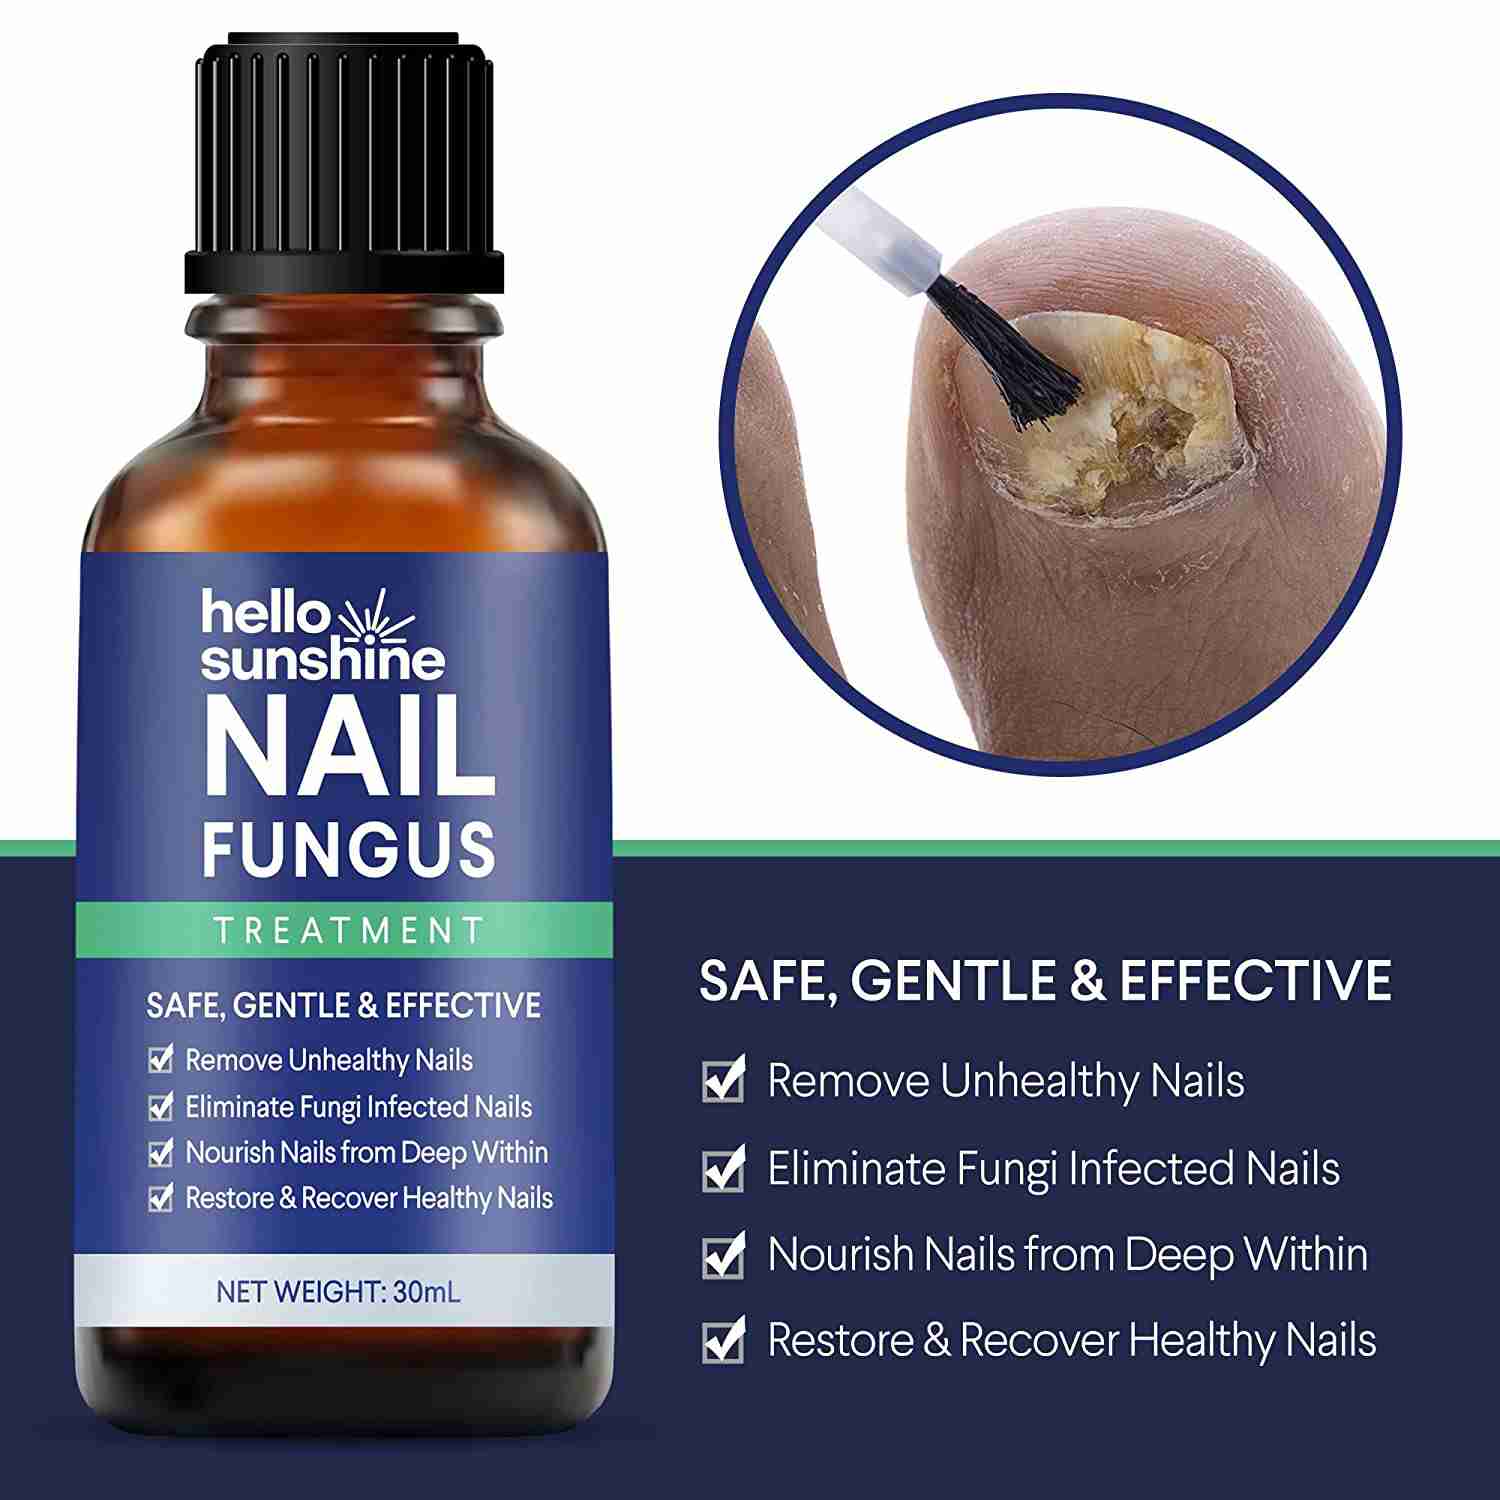 nail-fungus-treatment-for-toenail with discount code